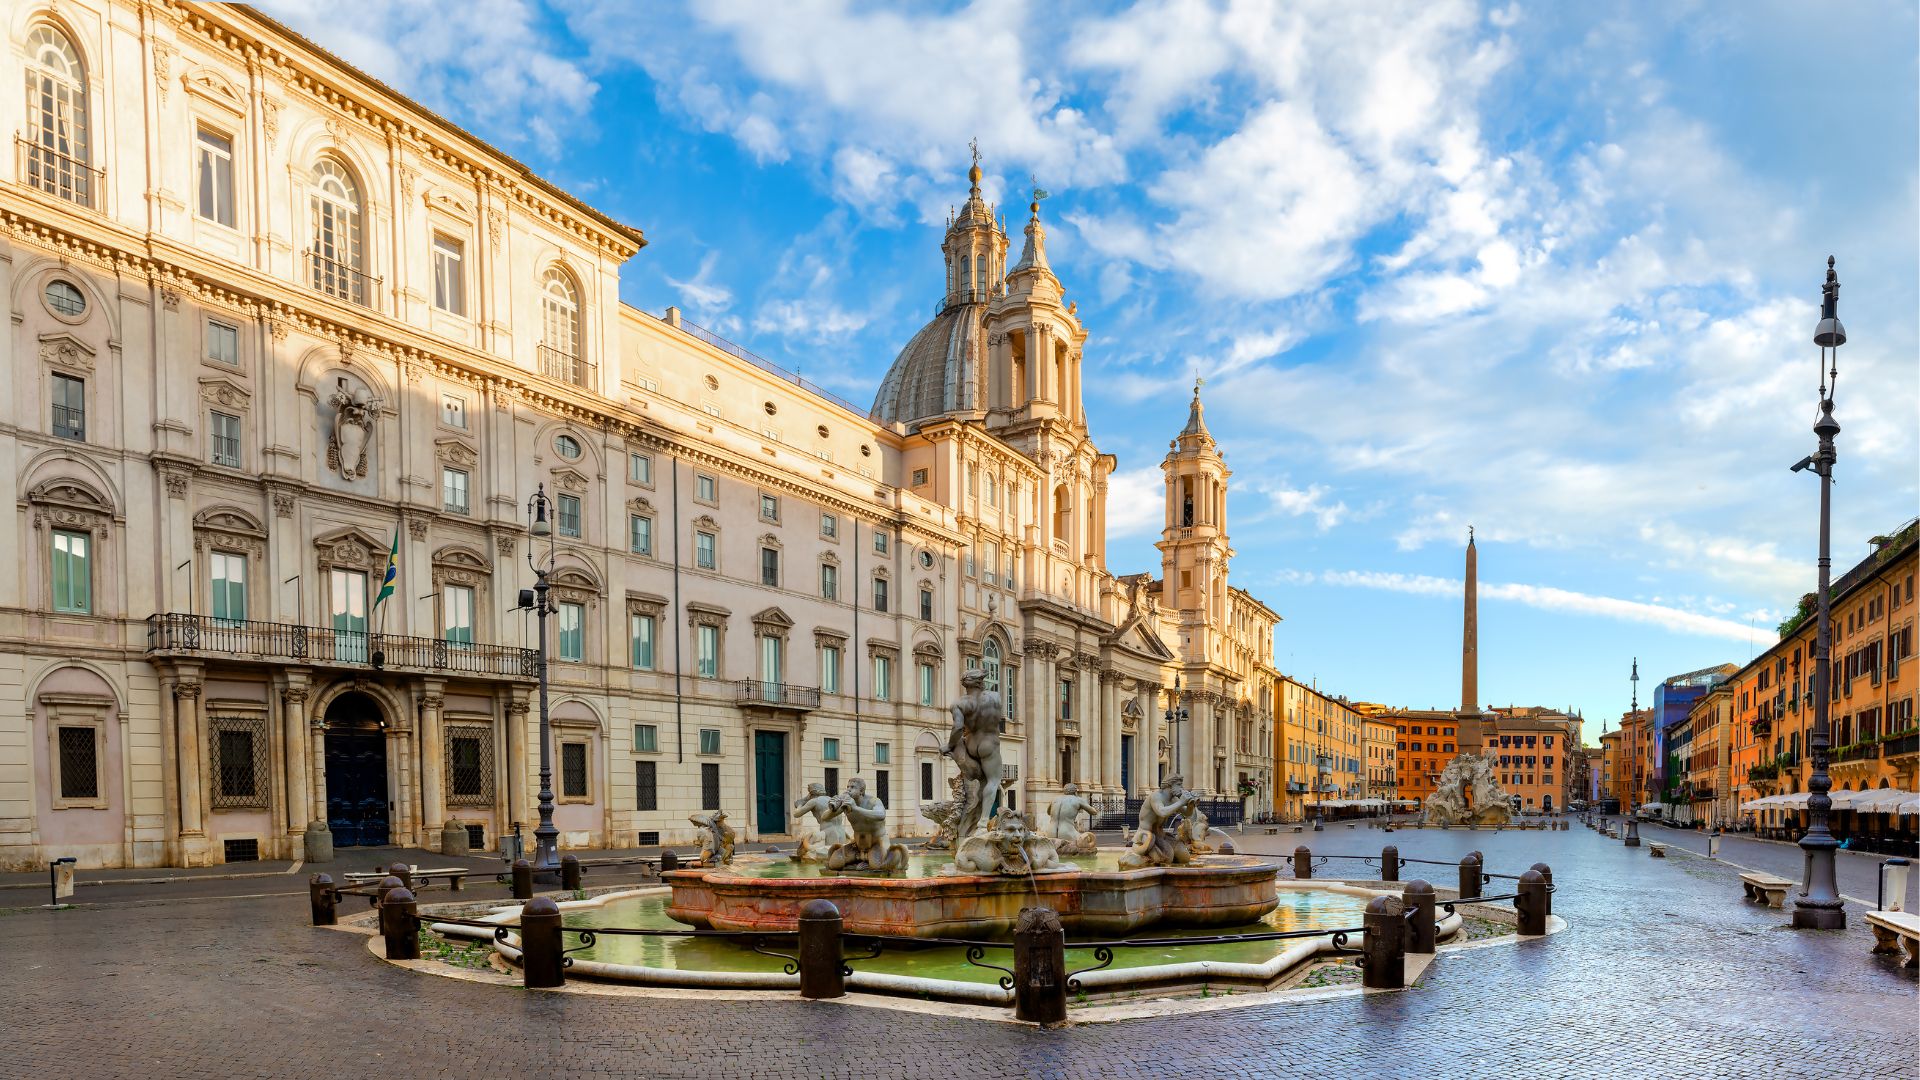 Piazza Navona, one of Rome's most picturesque squares.